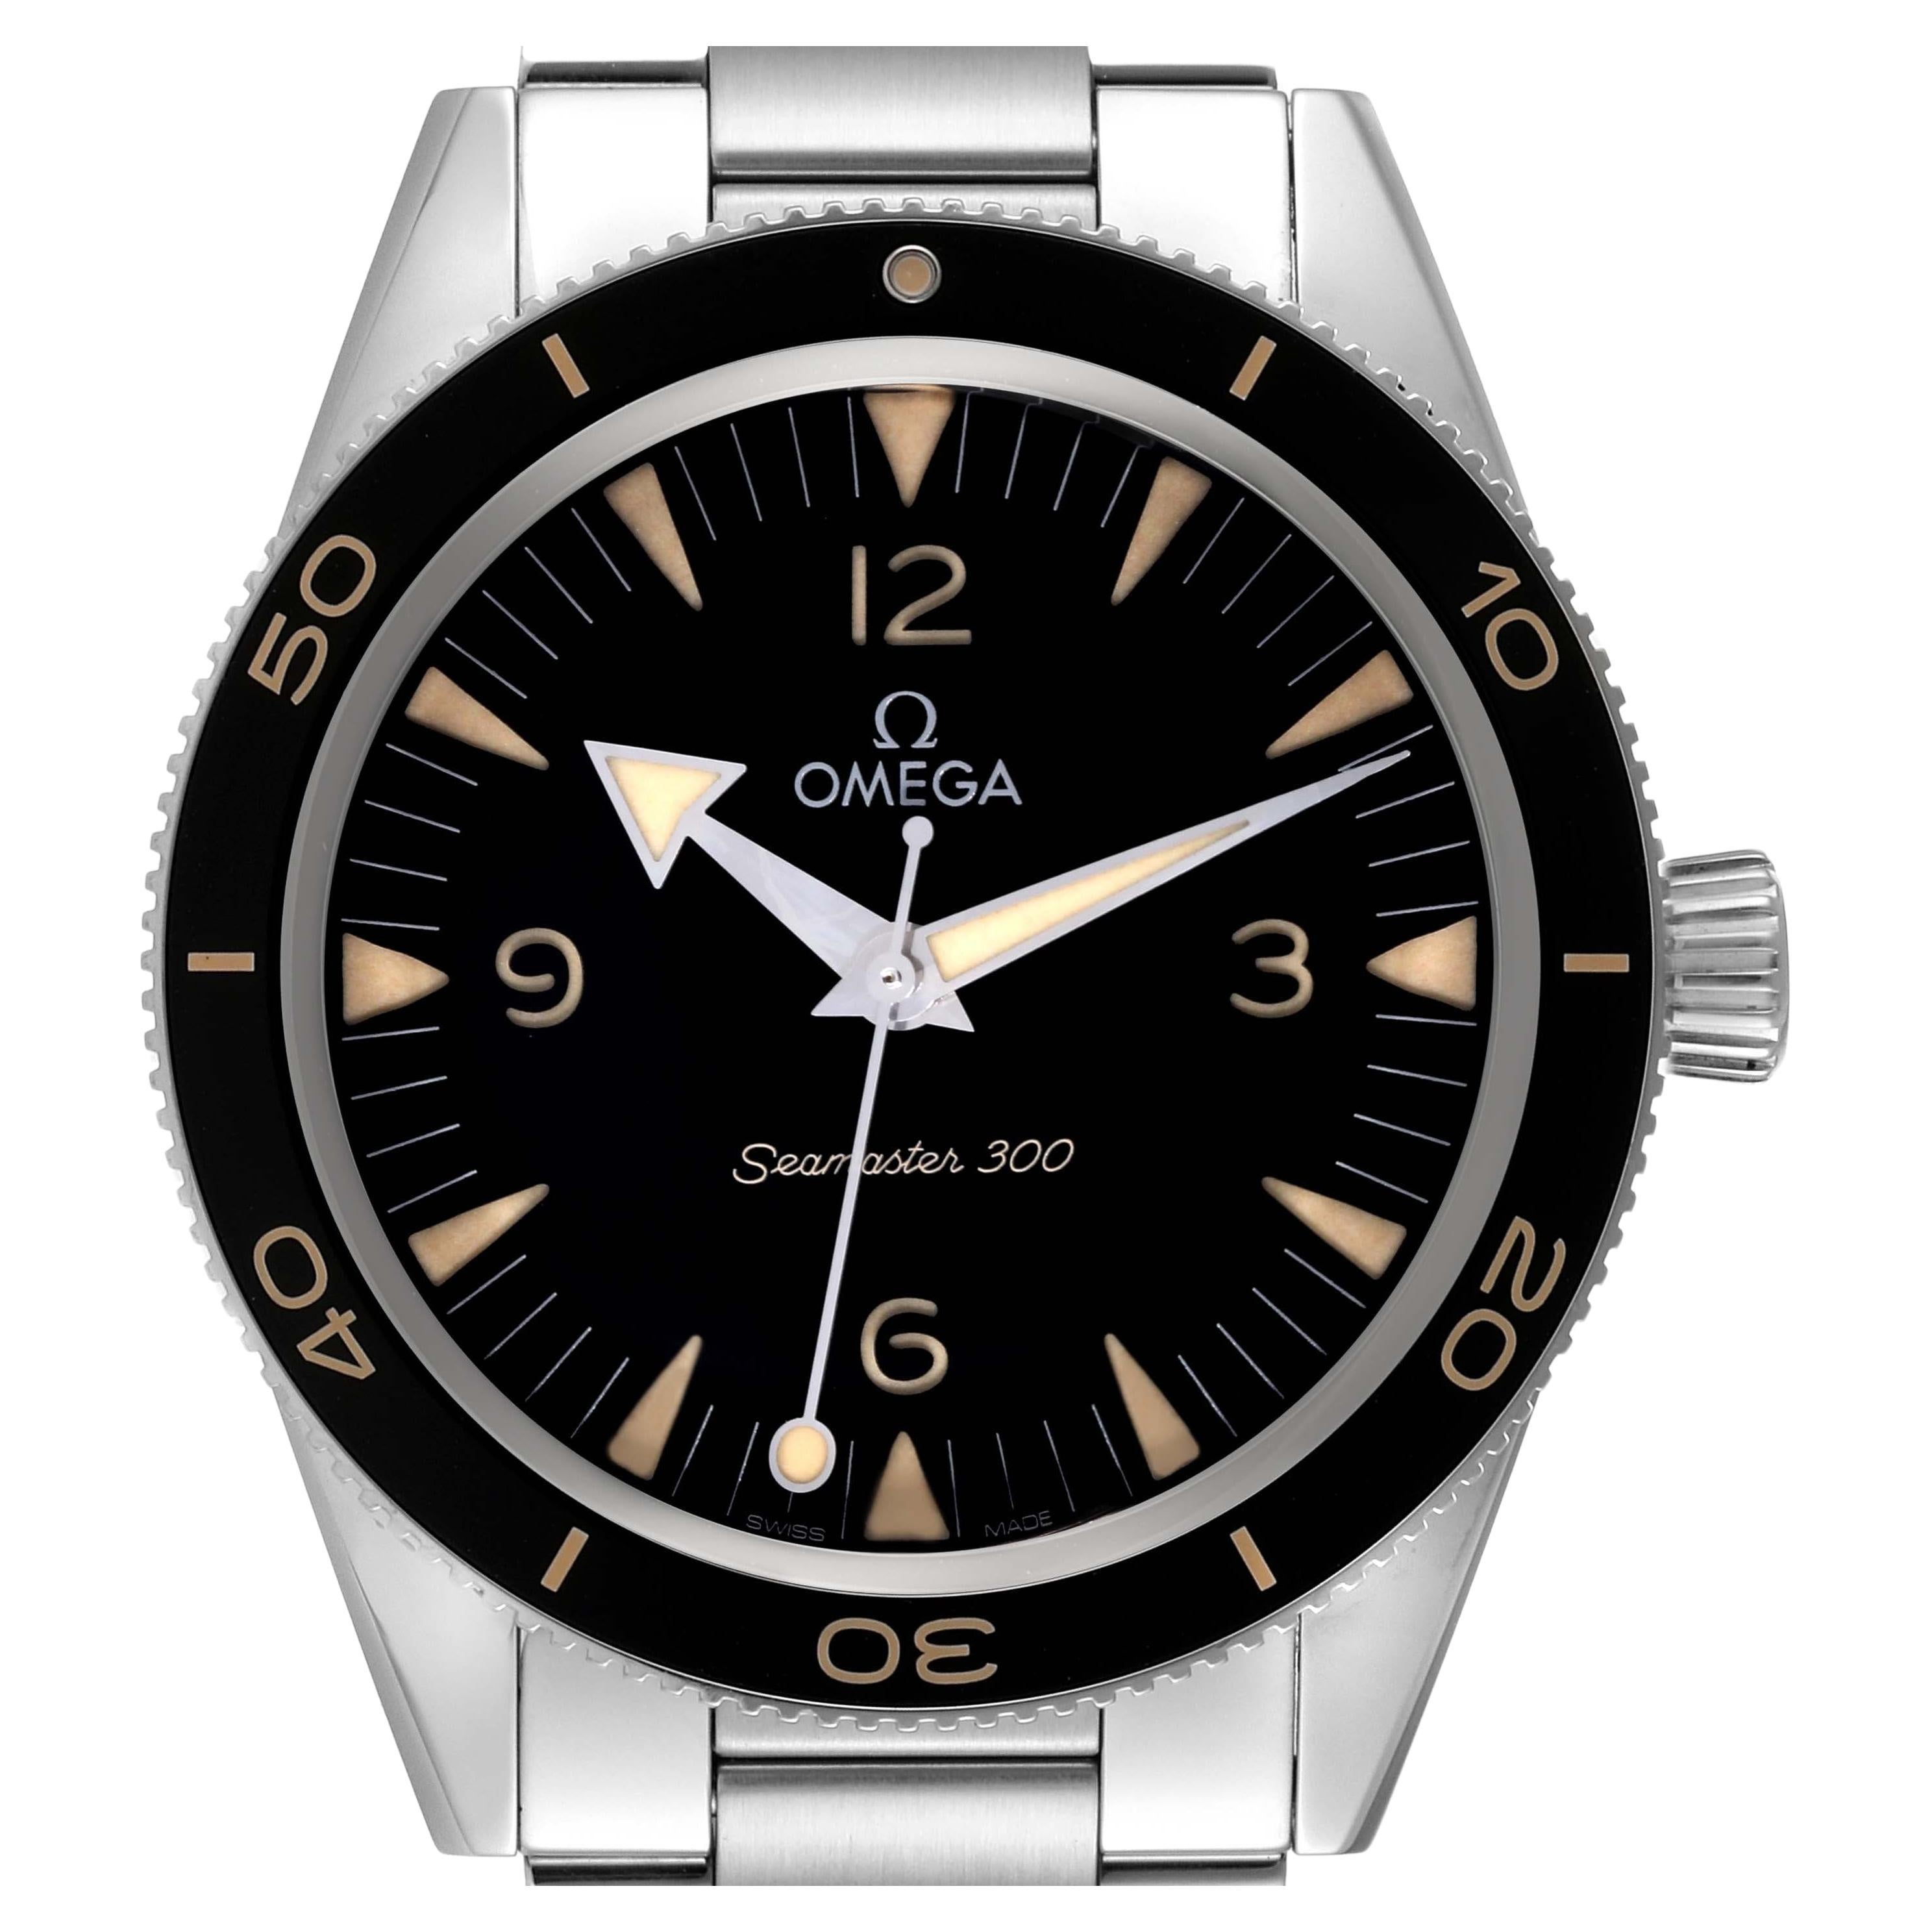 Omega Seamaster 300 Co-Axial Steel Mens Watch 234.30.41.21.01.001 Box Card For Sale